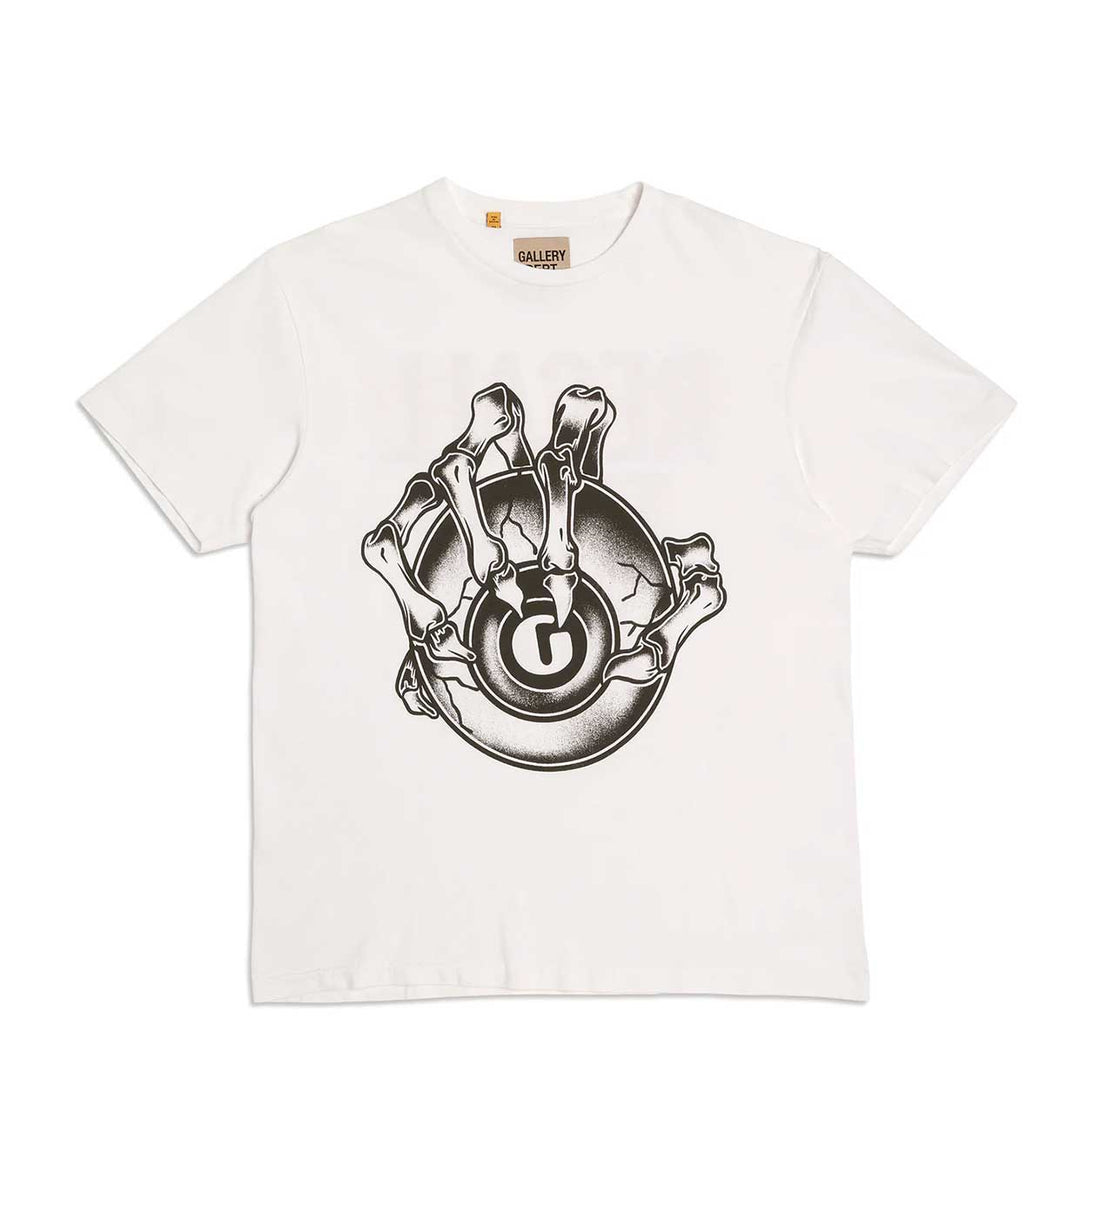 Gallery Dept. Big G Ball Tee White Front